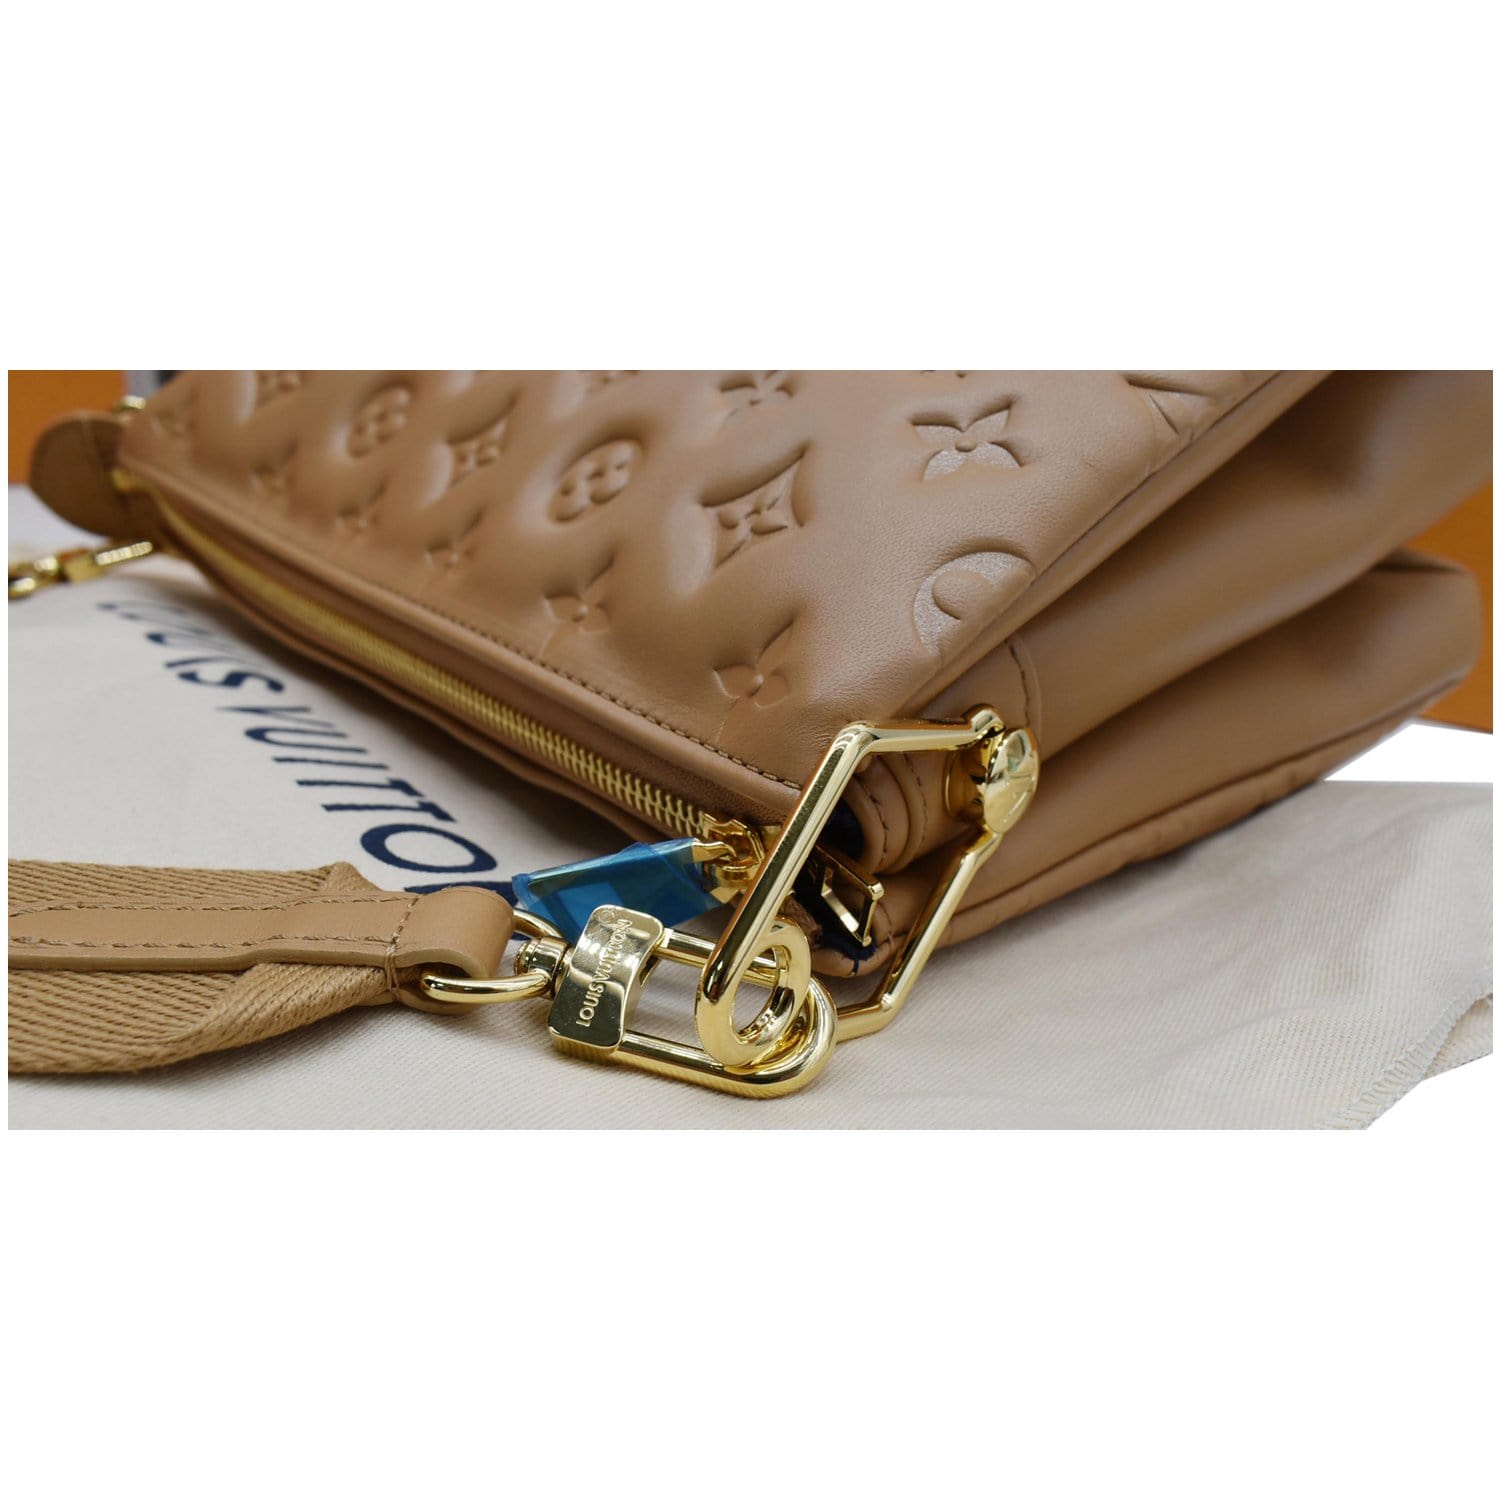 Empreinte leather bag charm Louis Vuitton Camel in Leather - 37204876